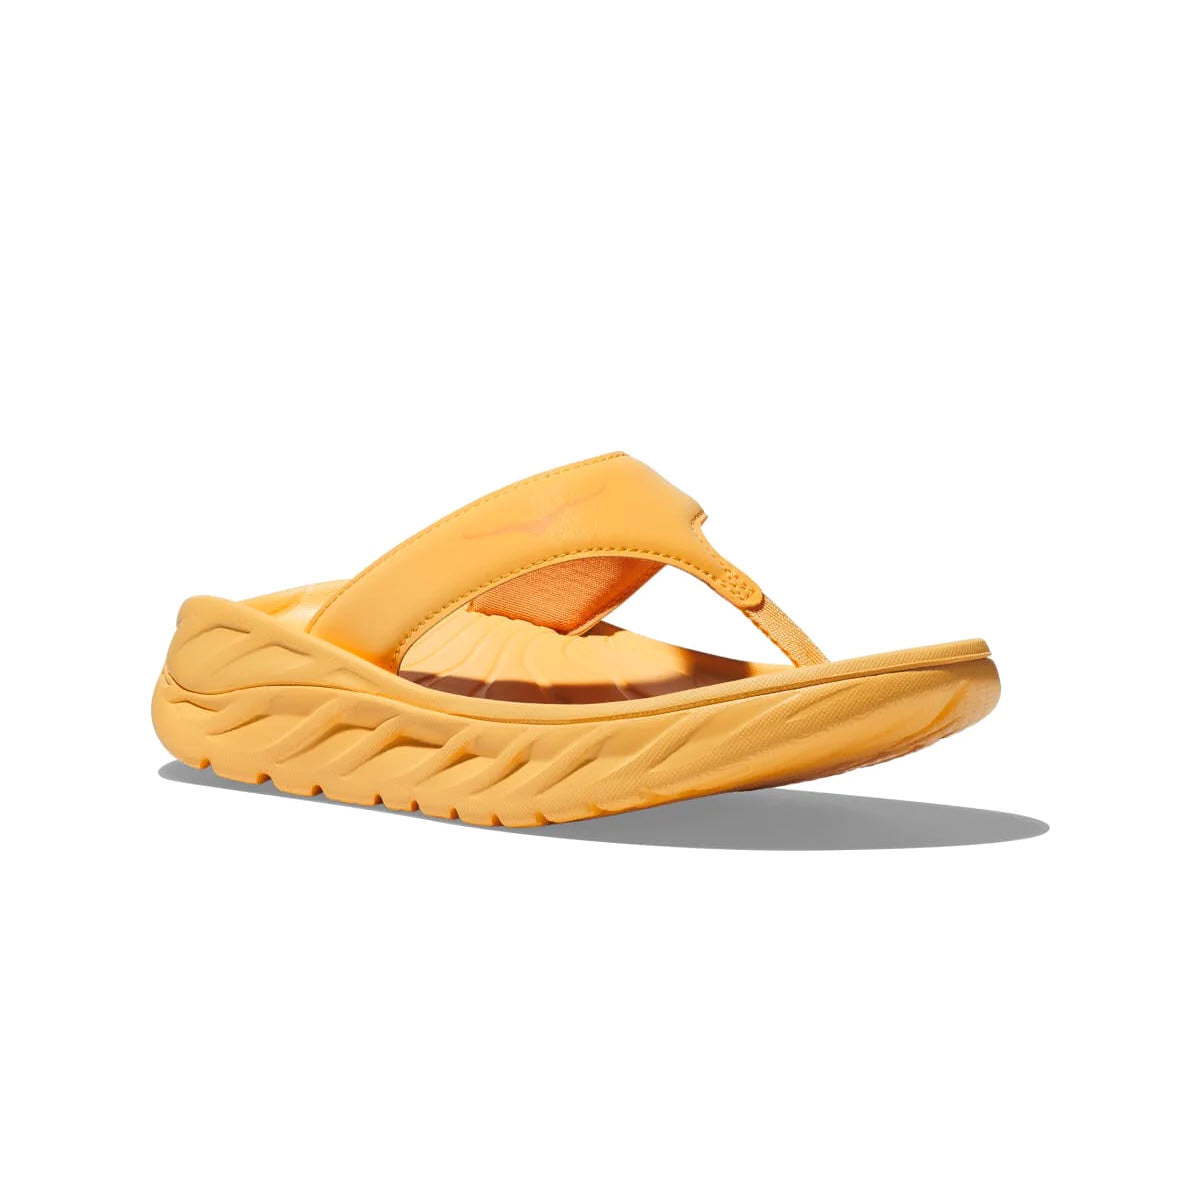 A single HOKA ORA RECOVERY FLIP WISTFUL POPPY/SQUASH sandal with a thick, oversized midsole and an over-the-foot strap, displayed against a plain white background.